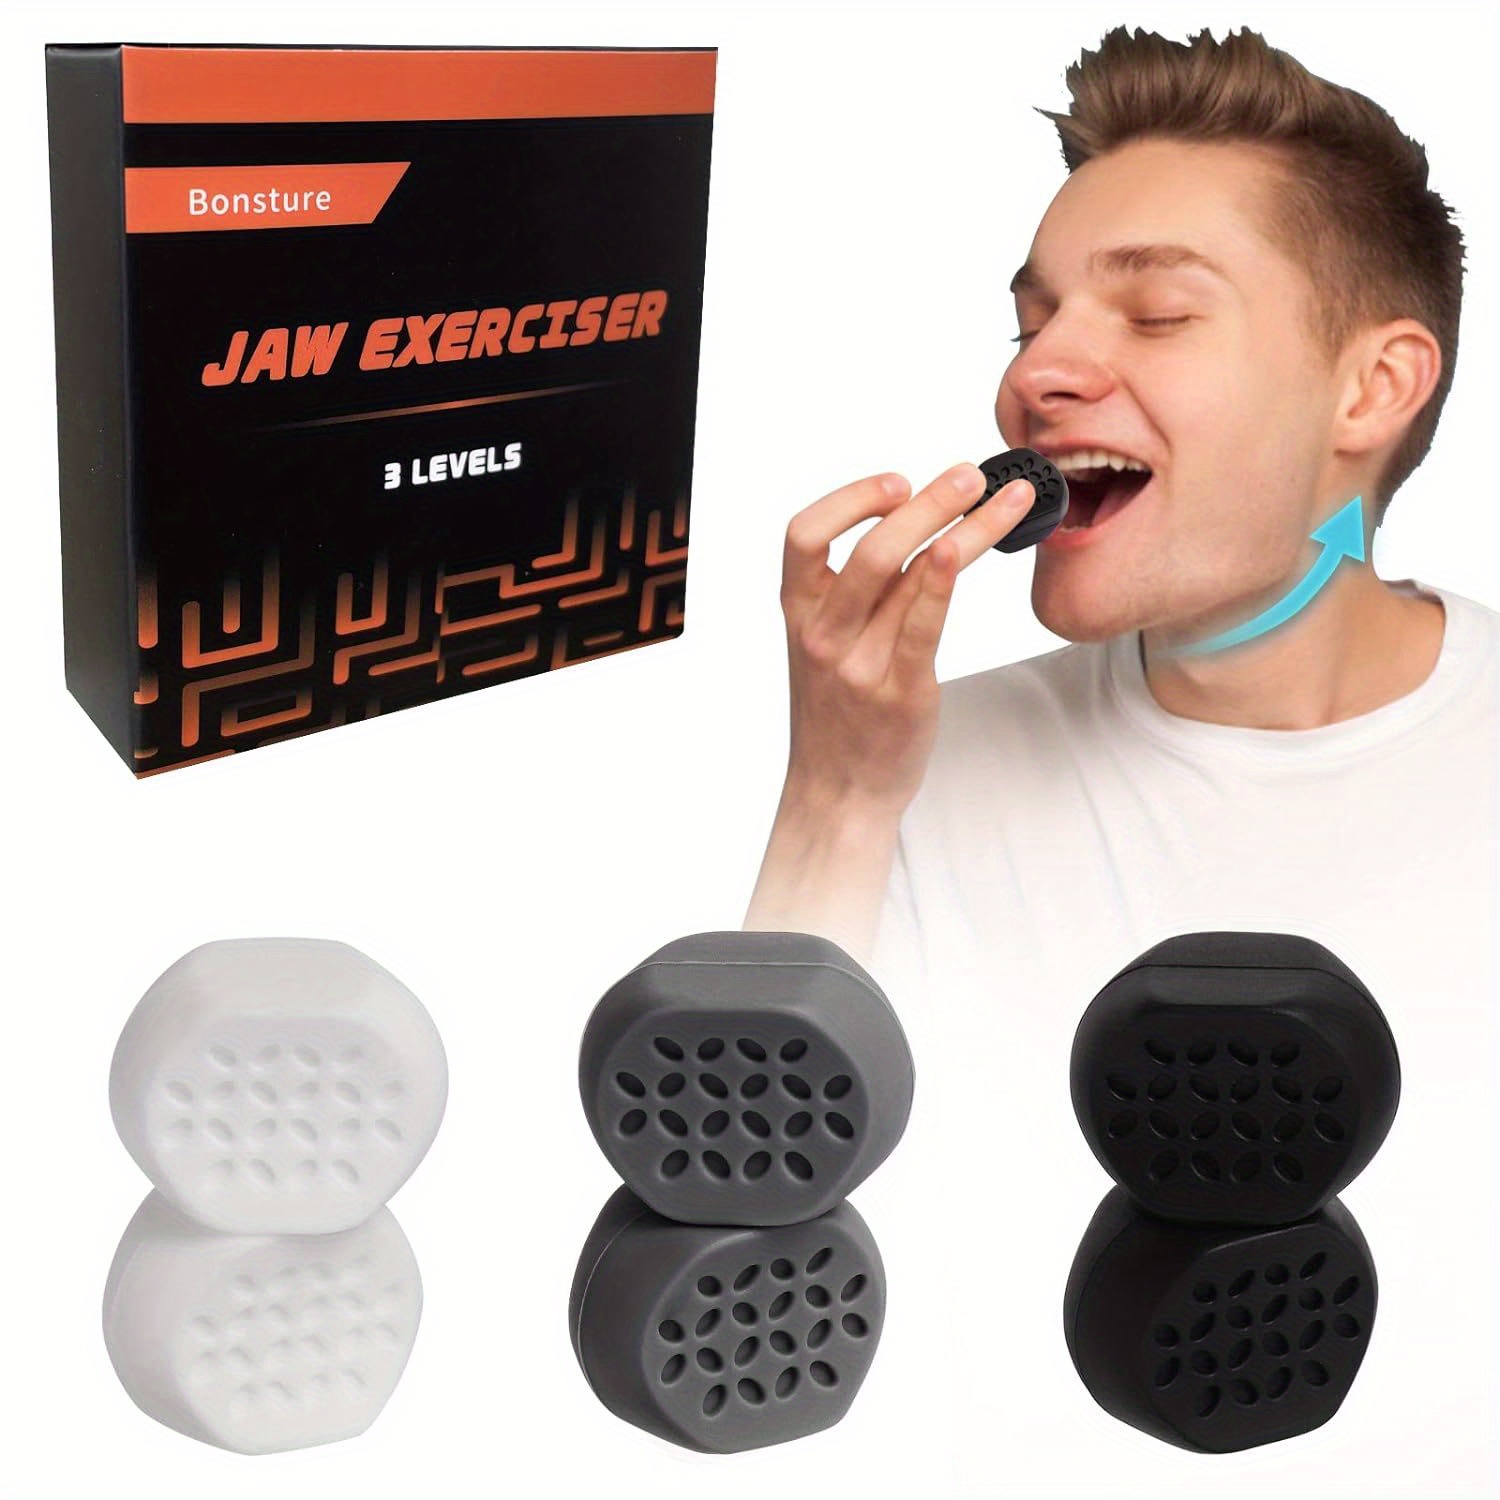 Jawline Exerciser, Jaw Exerciser For Men And Women, Jaw Trainer